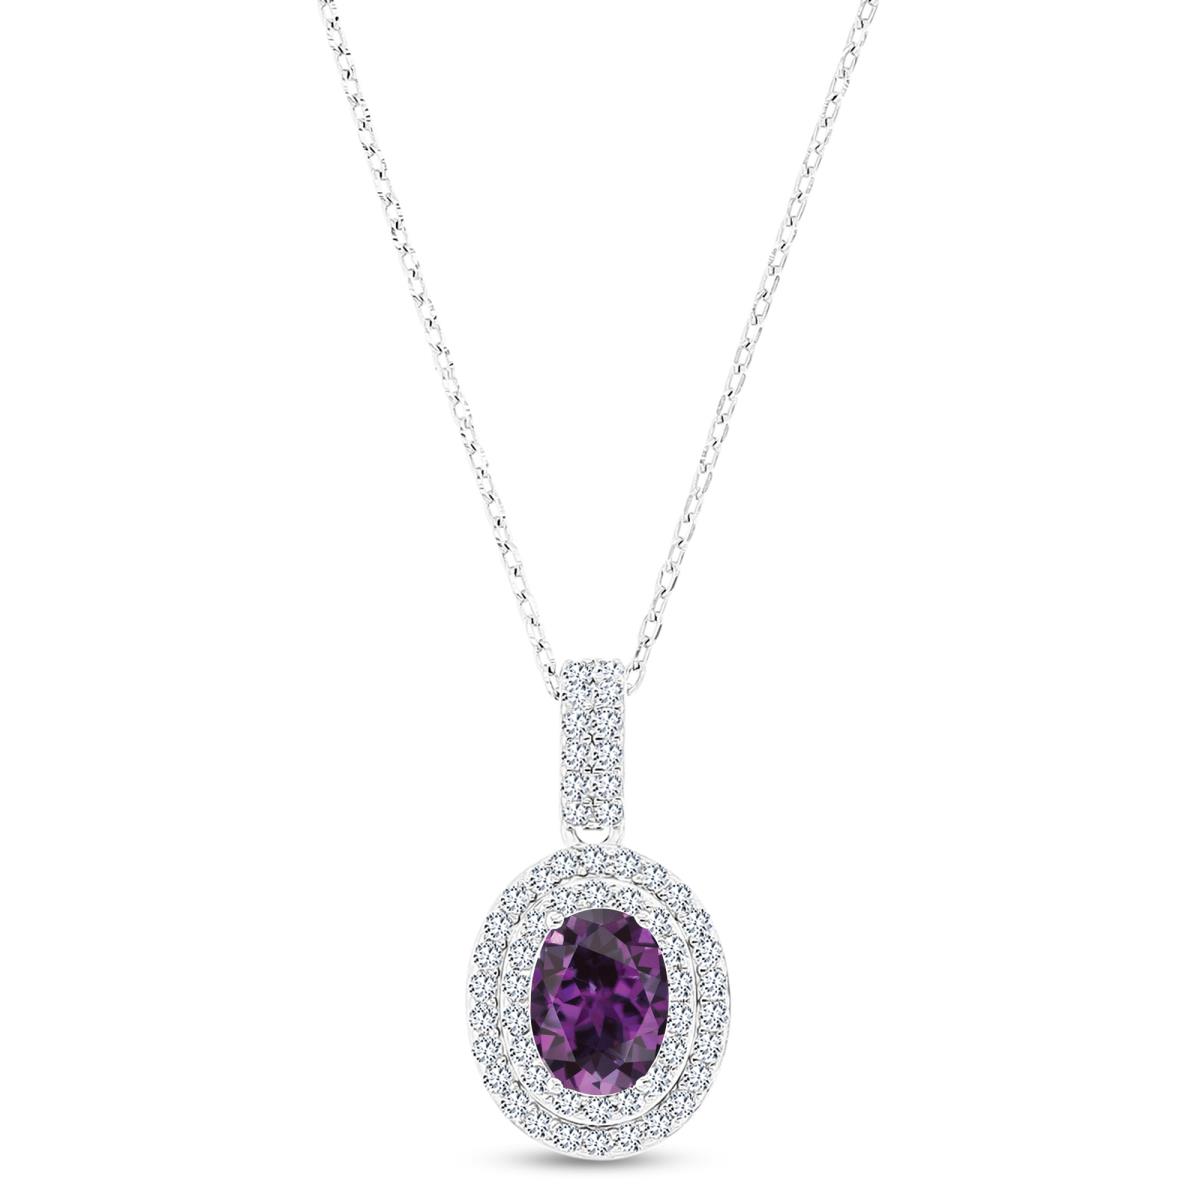 Sterling Silver Rhodium 8x6mm Oval Cr Alexandrite & Cr White Sapphire Halo 16"+2" Necklace